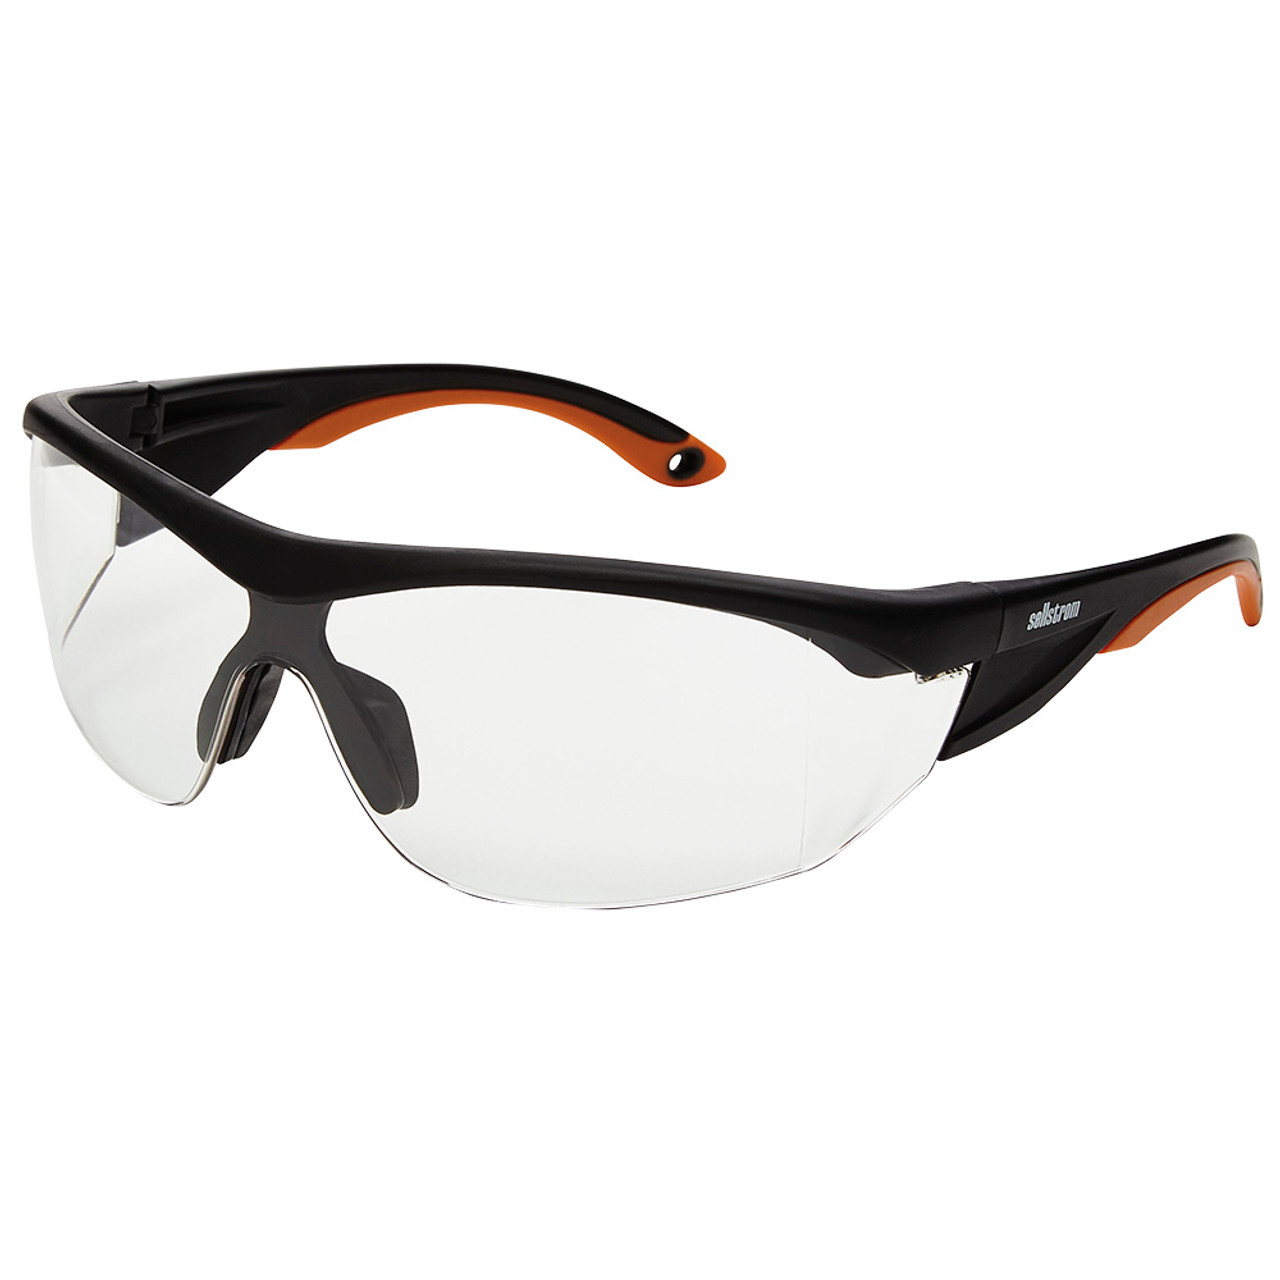 Sellstrom® XM320 Series Hard Coated Wrap Around Safety Glasses - Clear - Orange-Black Arms  S71400